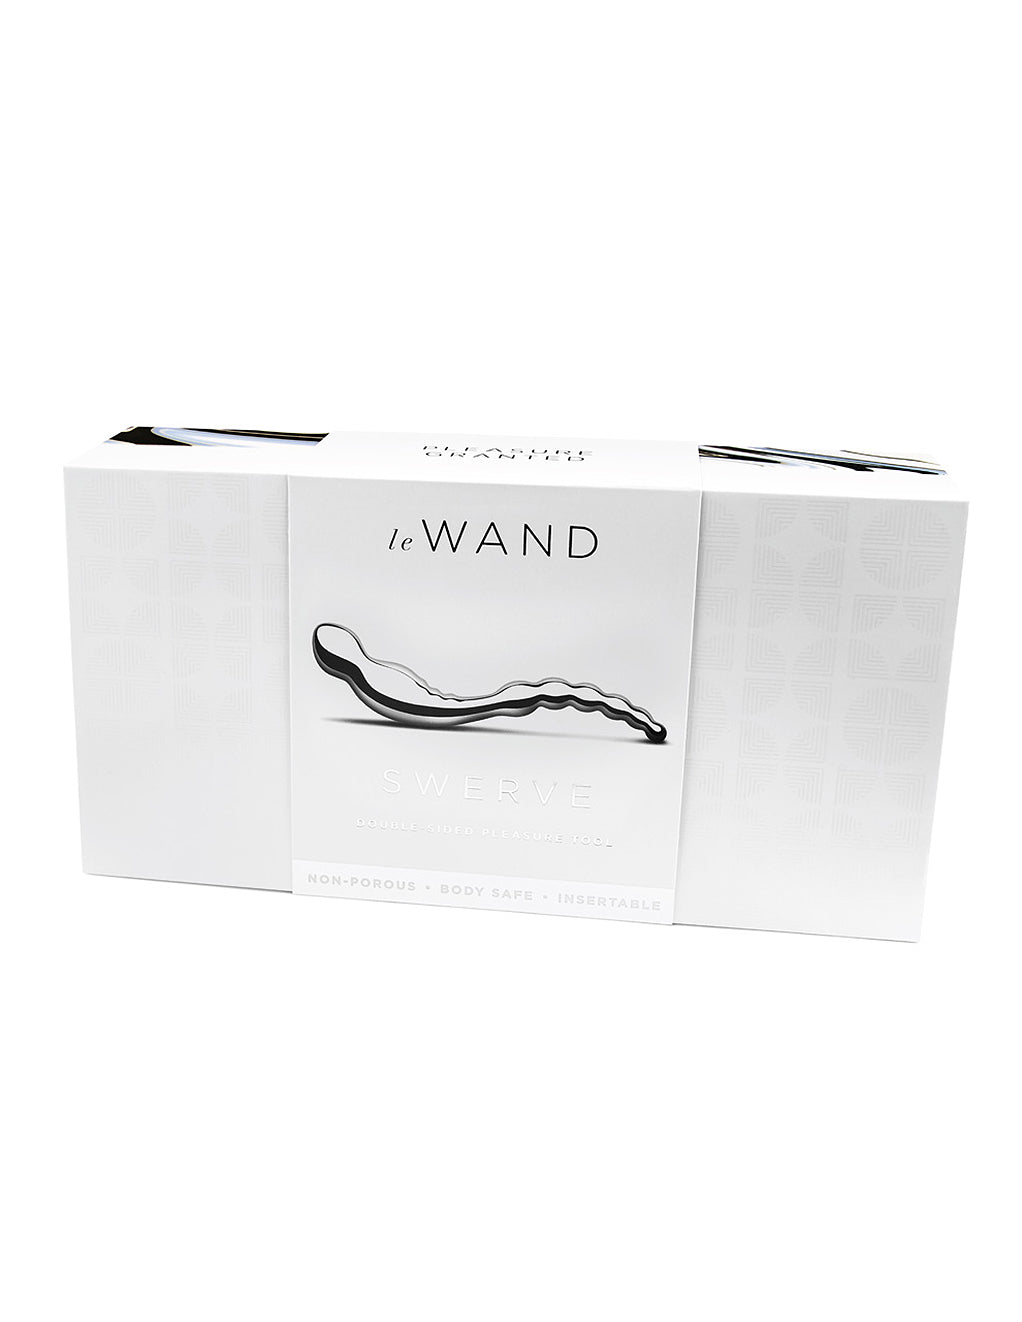 Le Wand Swerve Stainless Steel Double Ended Dildo- box